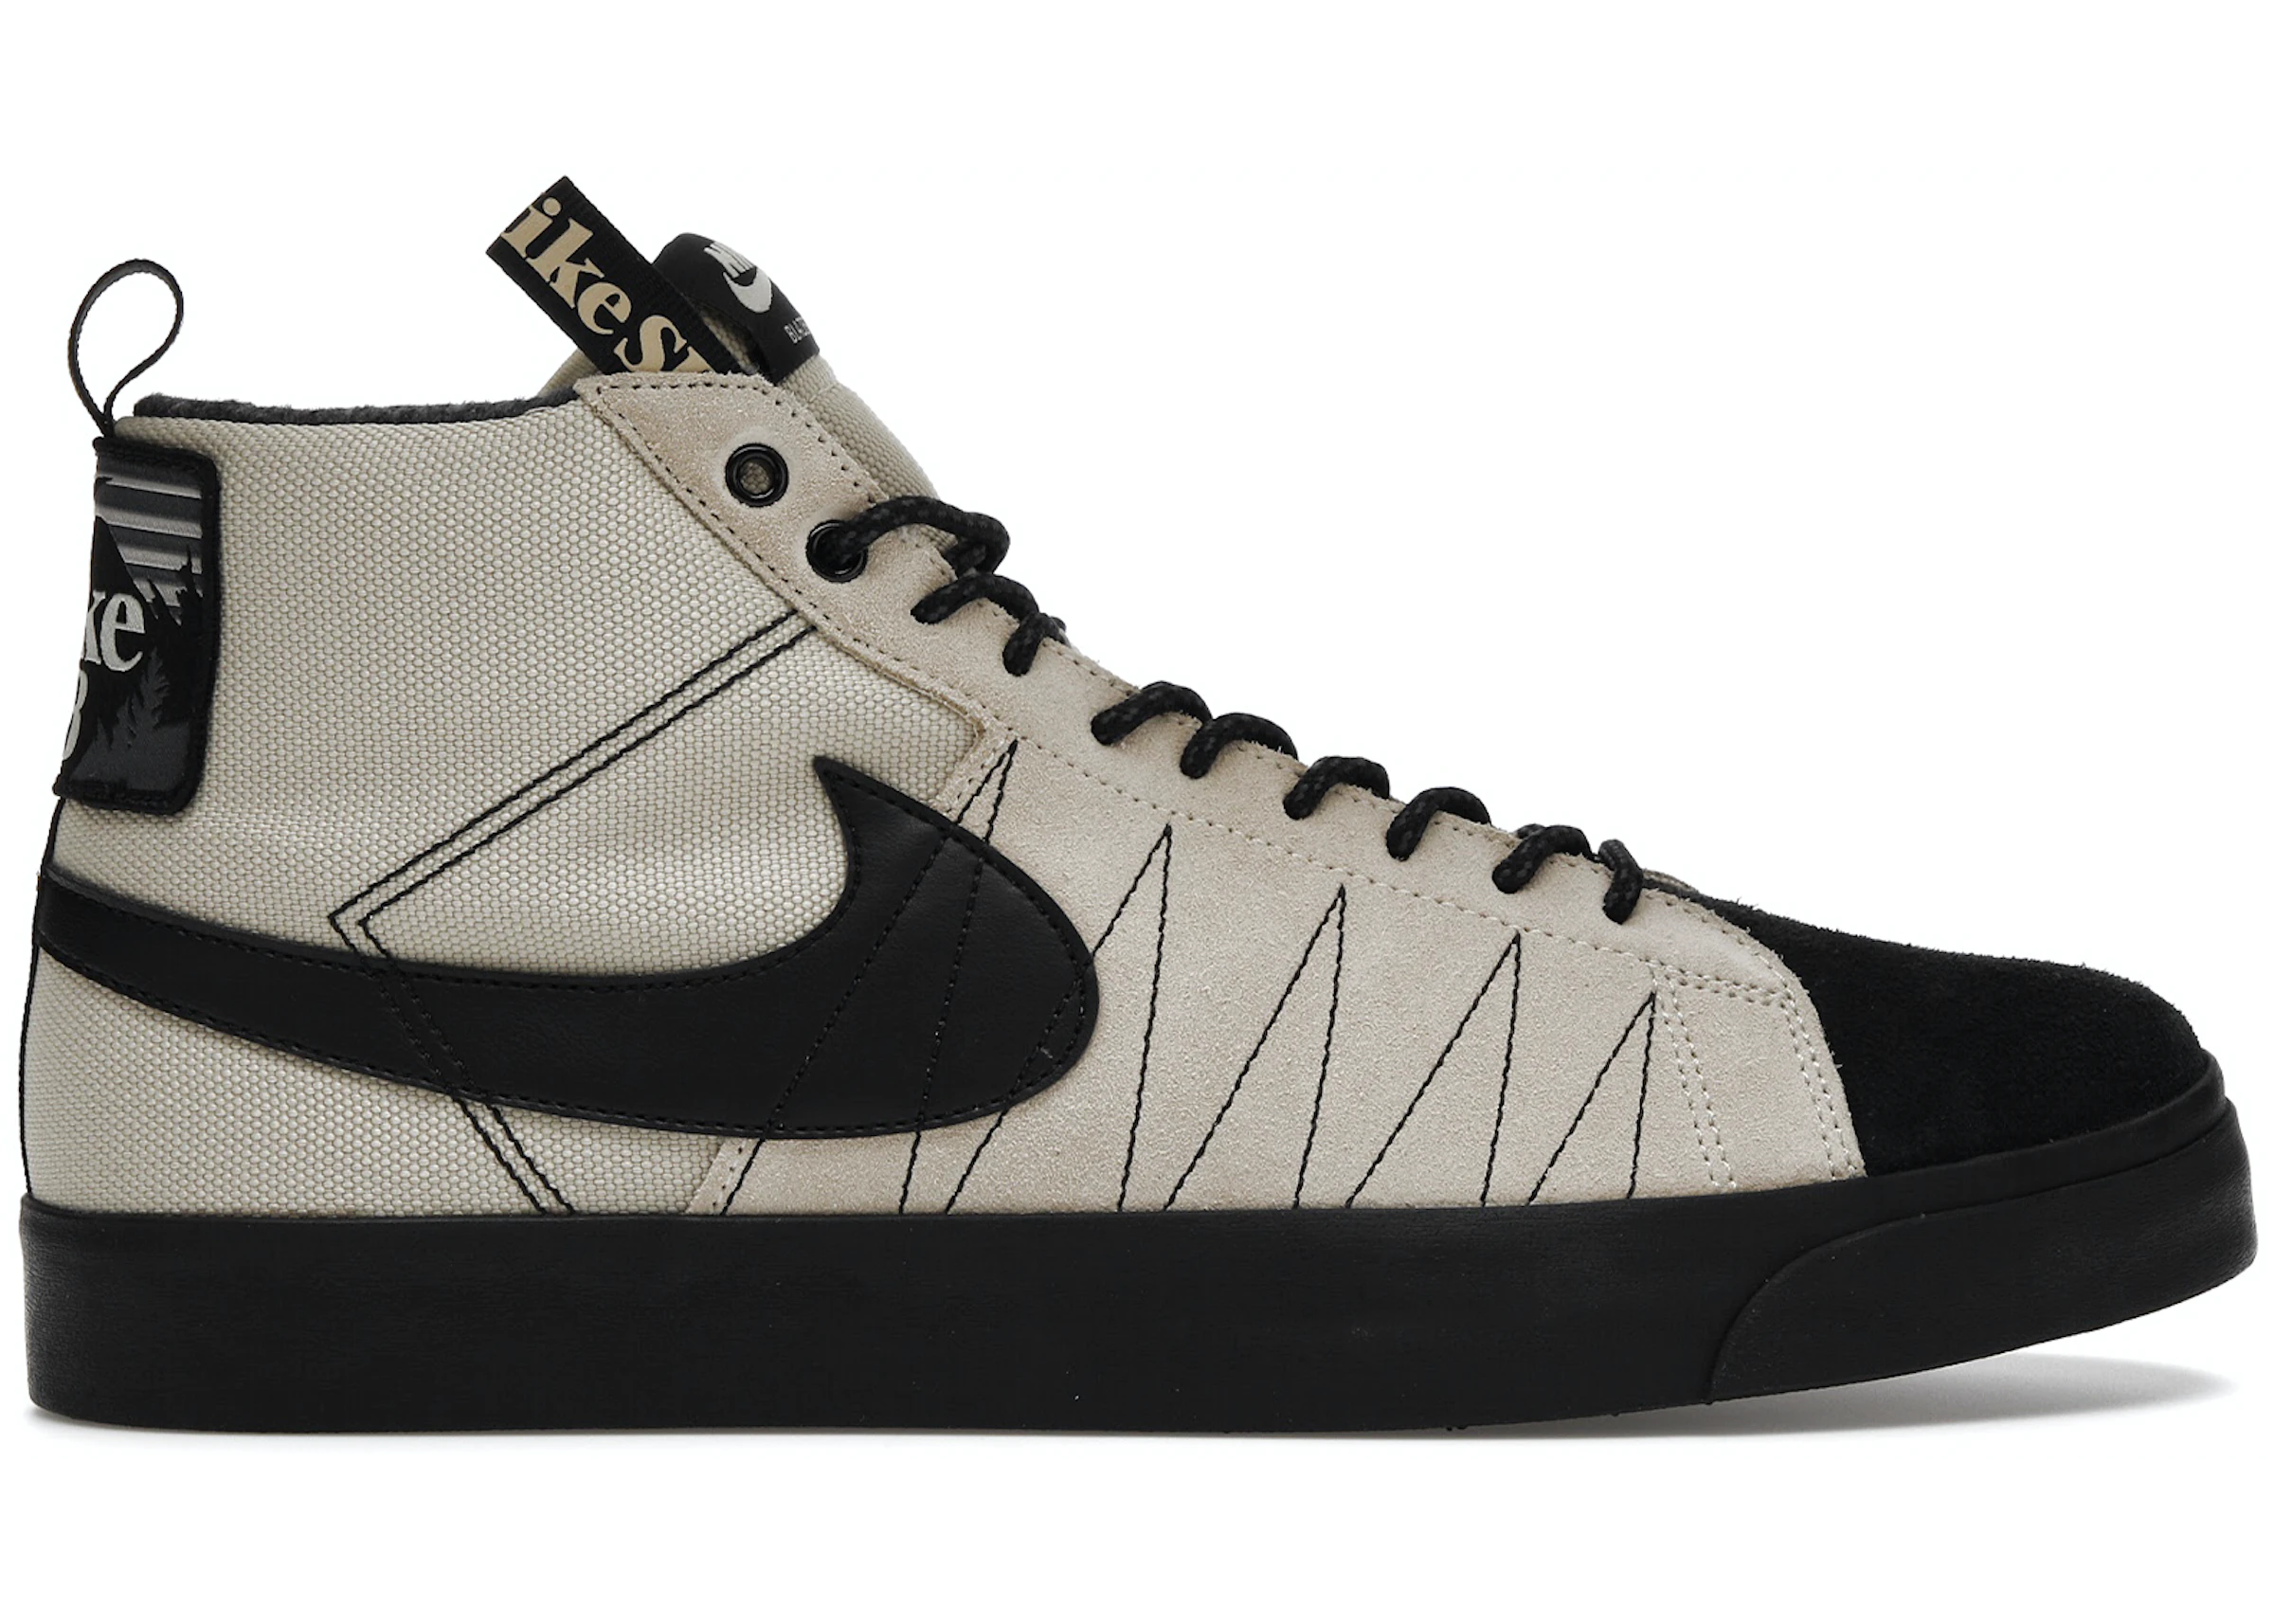 dance Contradict Separation Buy Nike SB Blazer Shoes & New Sneakers - StockX